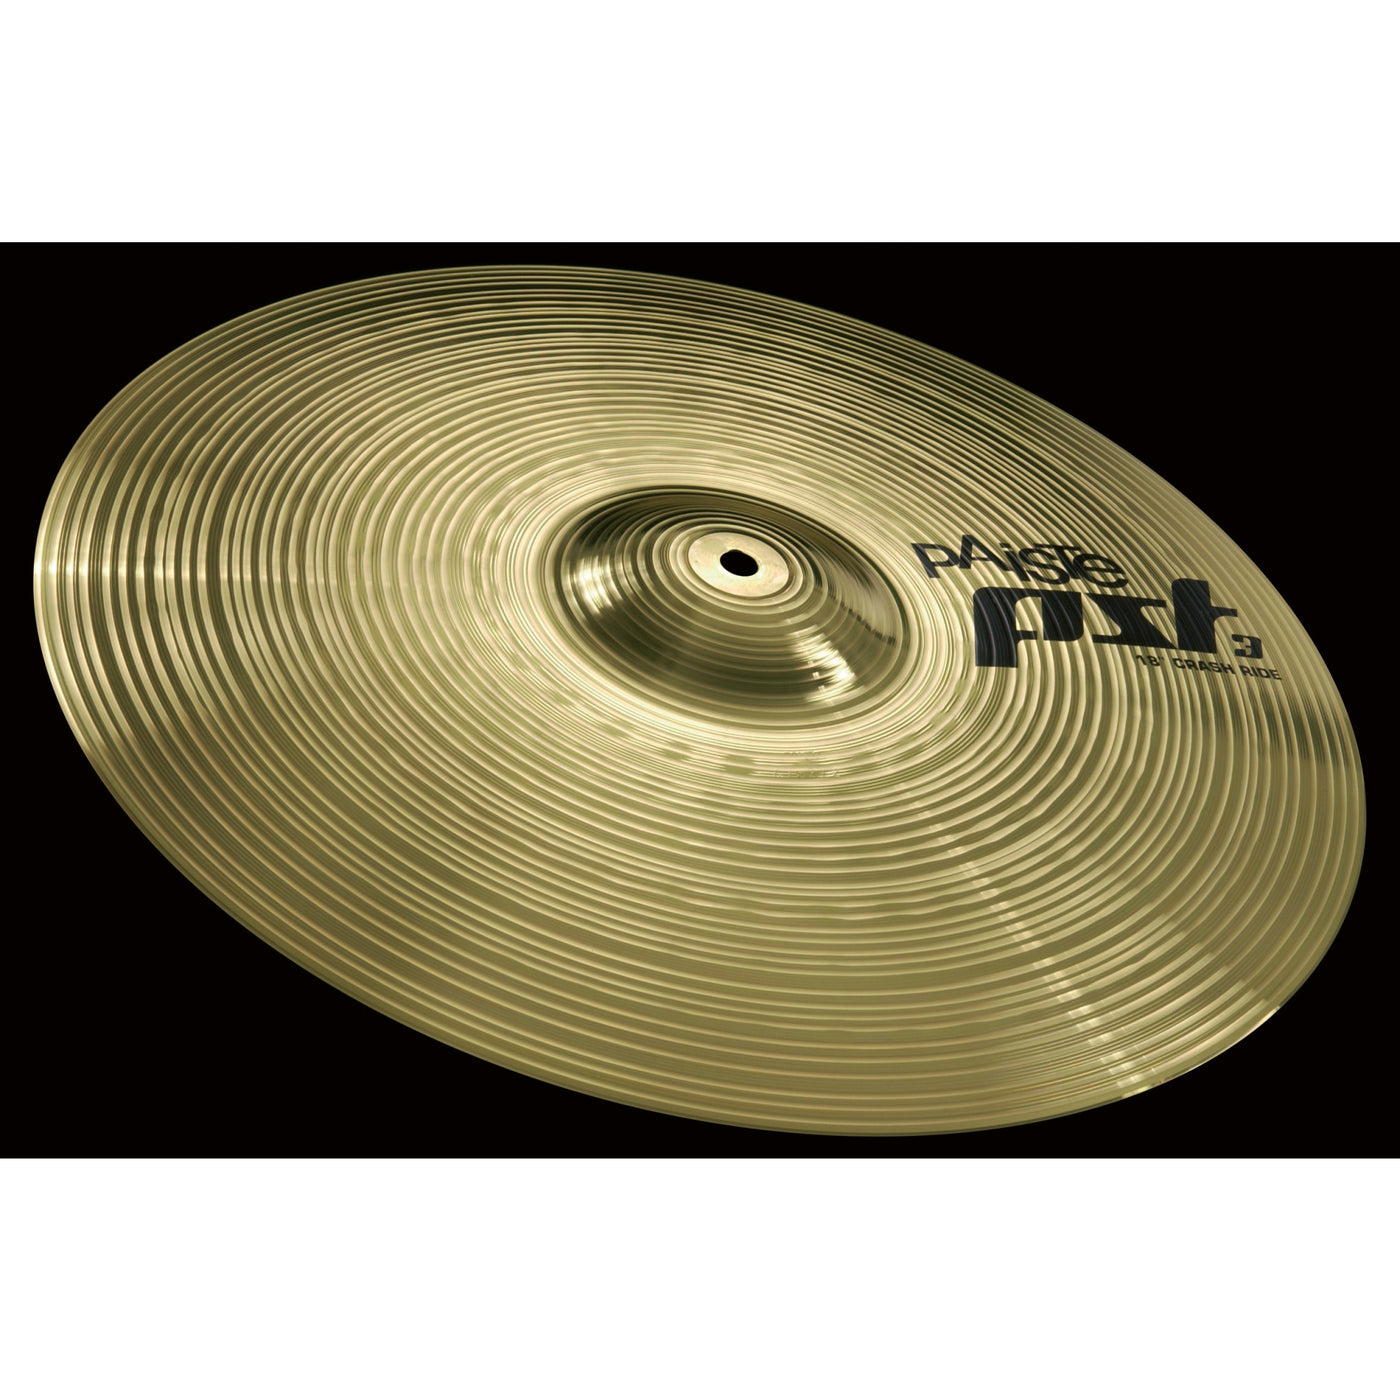 Paiste Crash/Ride Cymbal, PST 3 Series, Percussion Instrument for Drums, 18"